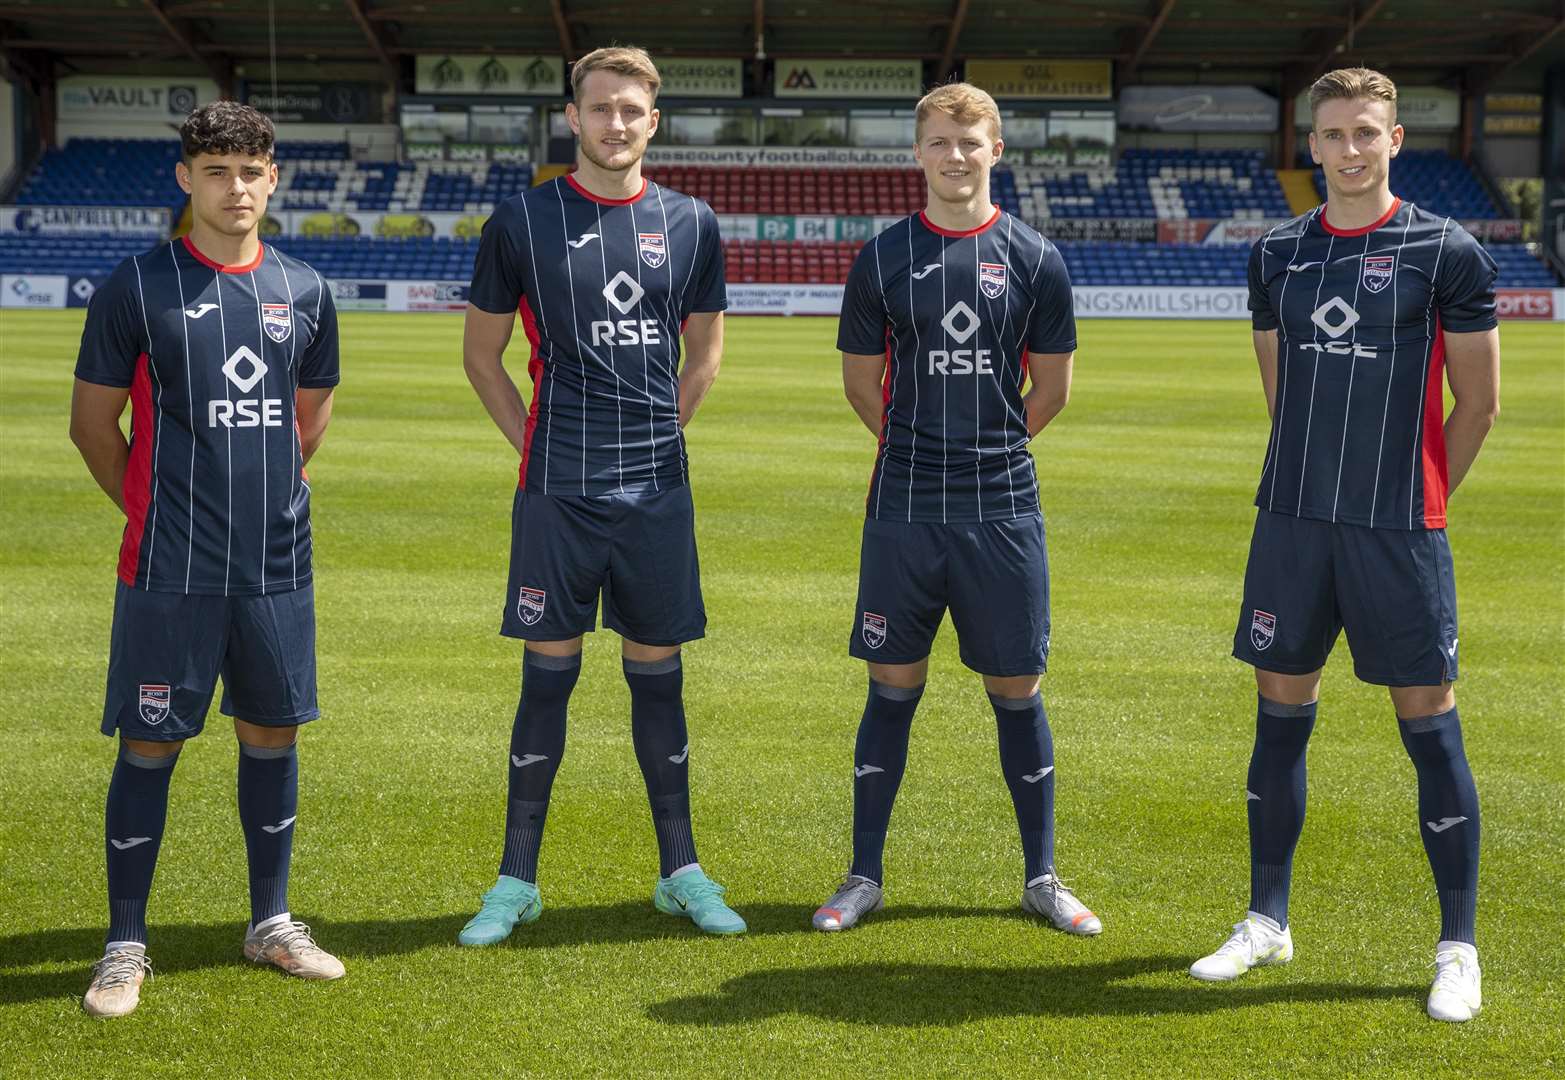 Picture - Ken Macpherson, Inverness. See story. Ross County yesterday (Thurs) launched their new home kit for the 2021/22 Premiership season. Ross County’s newest loan signing Alexander Robertson (left) modelled the new kit, alongside (l to r) defenders Coll Donaldson, Tom Grivosti (left) and striker Oli Shaw.